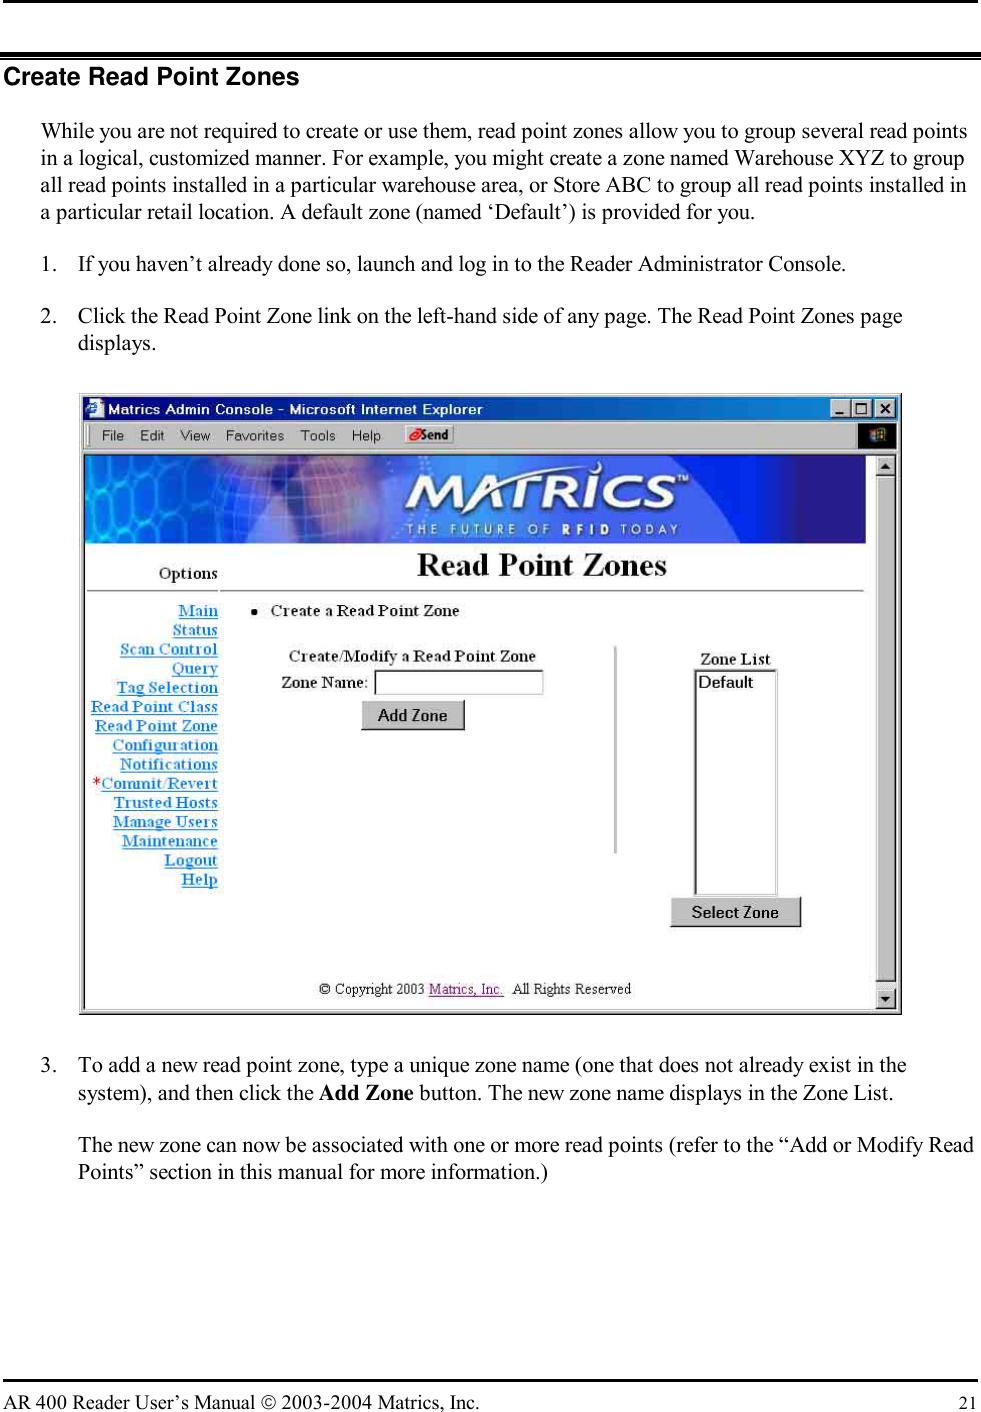   AR 400 Reader User’s Manual  2003-2004 Matrics, Inc.  21 Create Read Point Zones While you are not required to create or use them, read point zones allow you to group several read points in a logical, customized manner. For example, you might create a zone named Warehouse XYZ to group all read points installed in a particular warehouse area, or Store ABC to group all read points installed in a particular retail location. A default zone (named ‘Default’) is provided for you. 1.  If you haven’t already done so, launch and log in to the Reader Administrator Console. 2.  Click the Read Point Zone link on the left-hand side of any page. The Read Point Zones page displays.  3.  To add a new read point zone, type a unique zone name (one that does not already exist in the system), and then click the Add Zone button. The new zone name displays in the Zone List. The new zone can now be associated with one or more read points (refer to the “Add or Modify Read Points” section in this manual for more information.)  